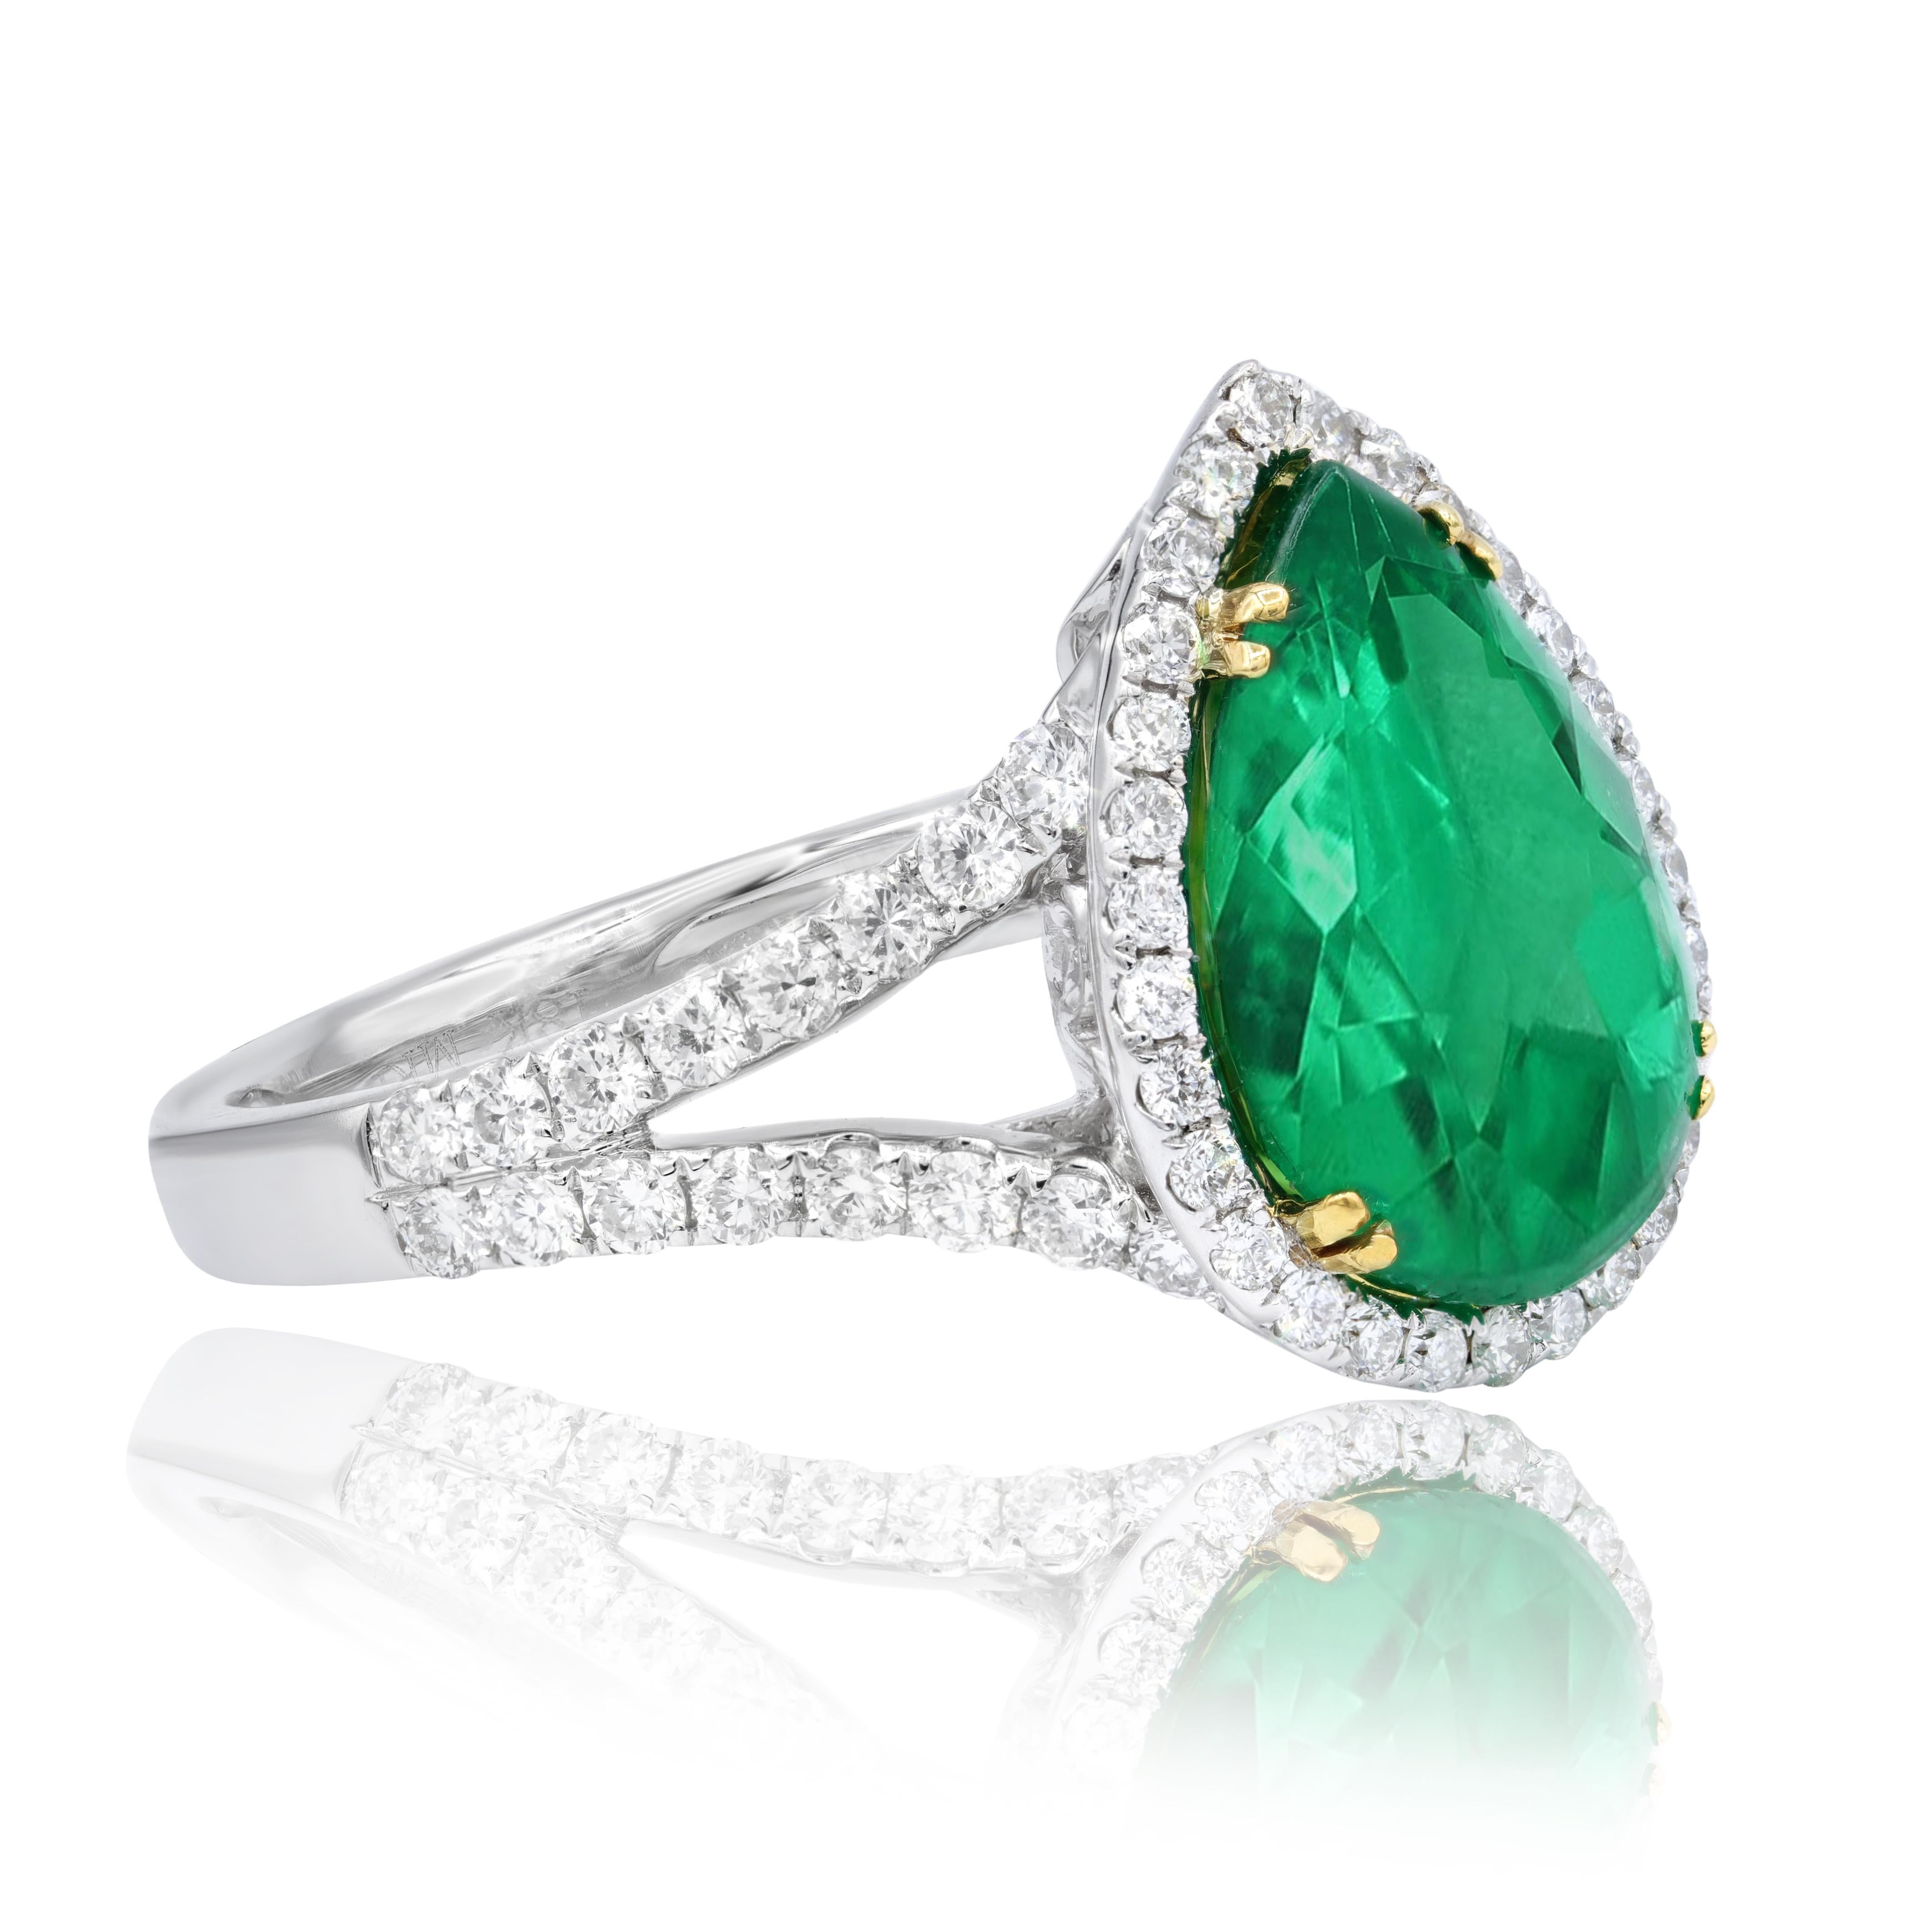 18KT two tone ring features 3.79 ct of pear shape emerald and 0.79 cts of white round diamonds in a halo set in a split shank setting.
Can be resized to any finger size.

This product comes with a certificate of appraisal
This product will be